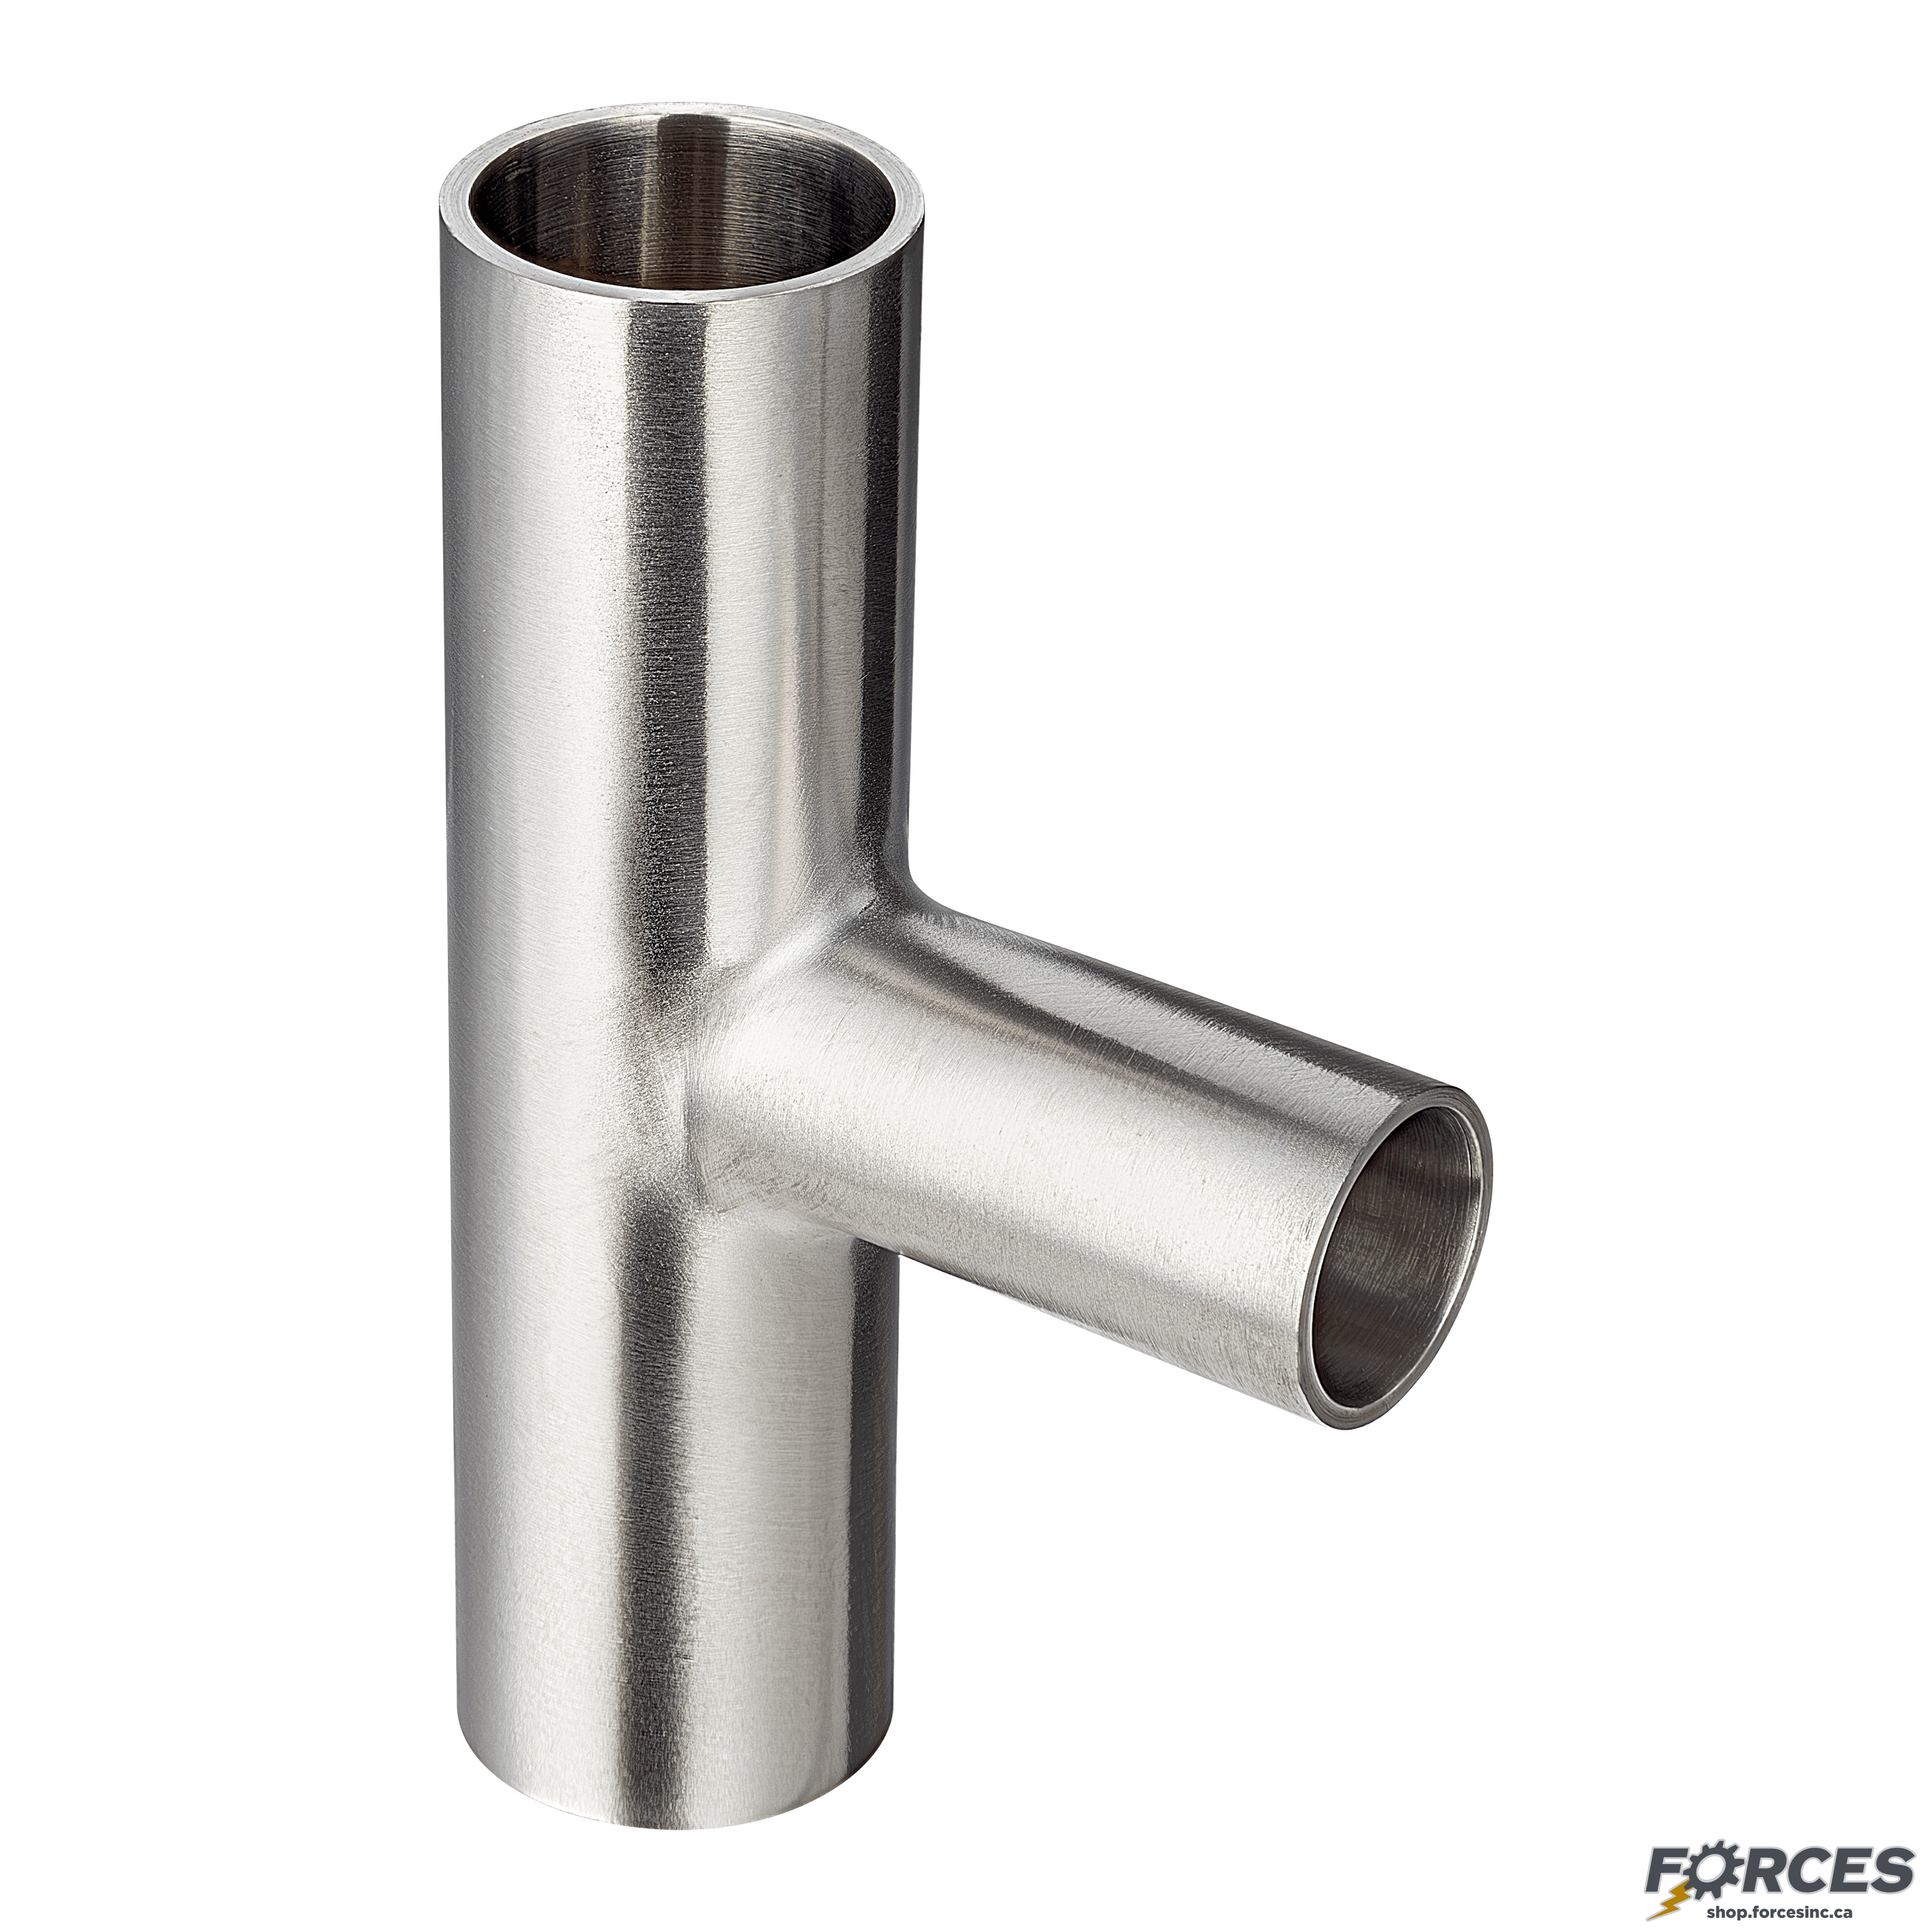 1" x 3/4" Butt Weld Tee Reducer - Stainless Steel 316 - Forces Inc